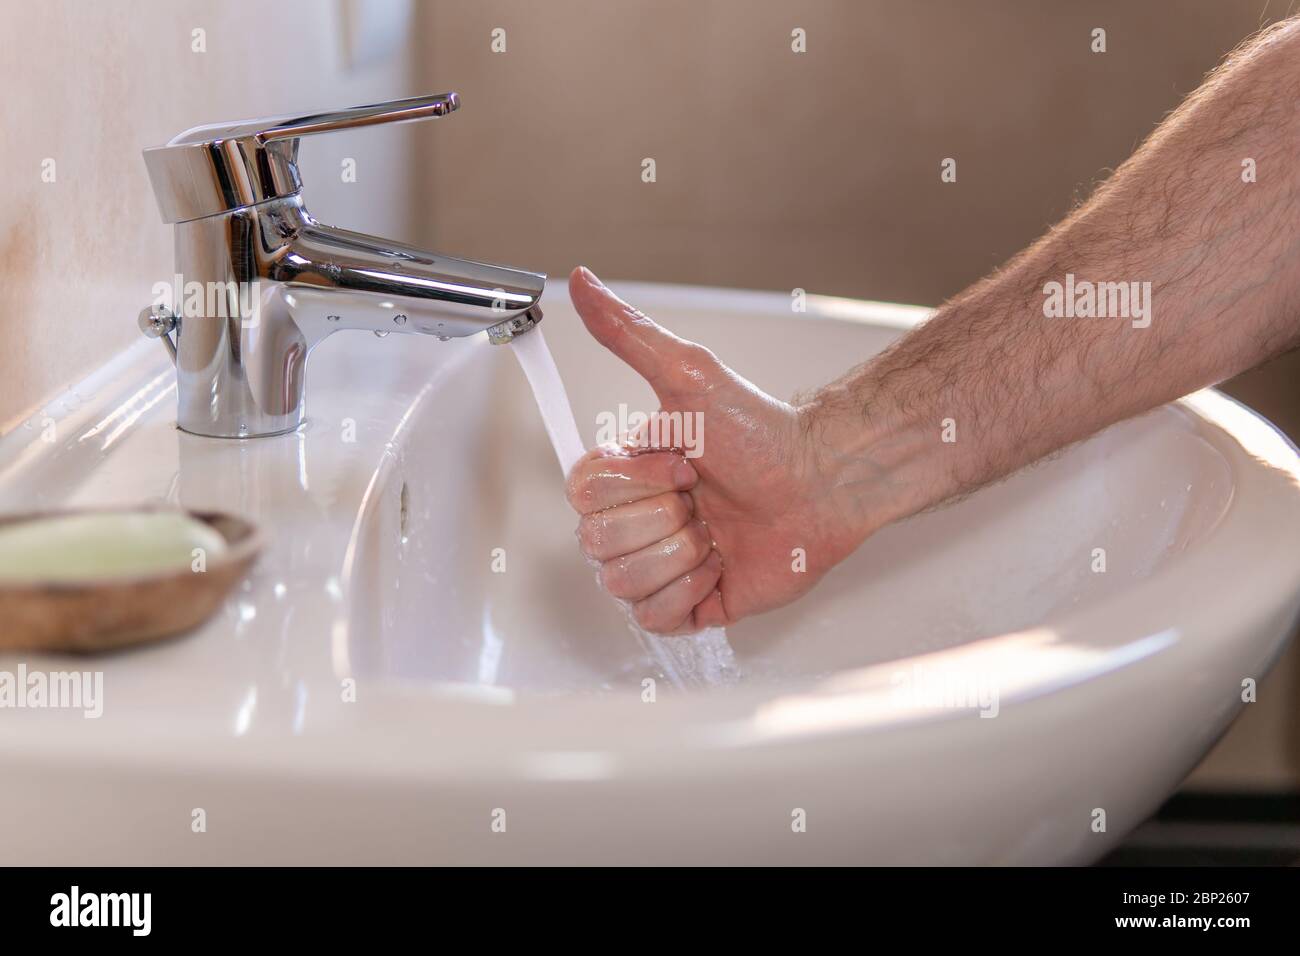 Hand of young caucasian man under a running water tap, showing thumb up gesture. Concept of personal hygiene, economical usage of water, saving money Stock Photo